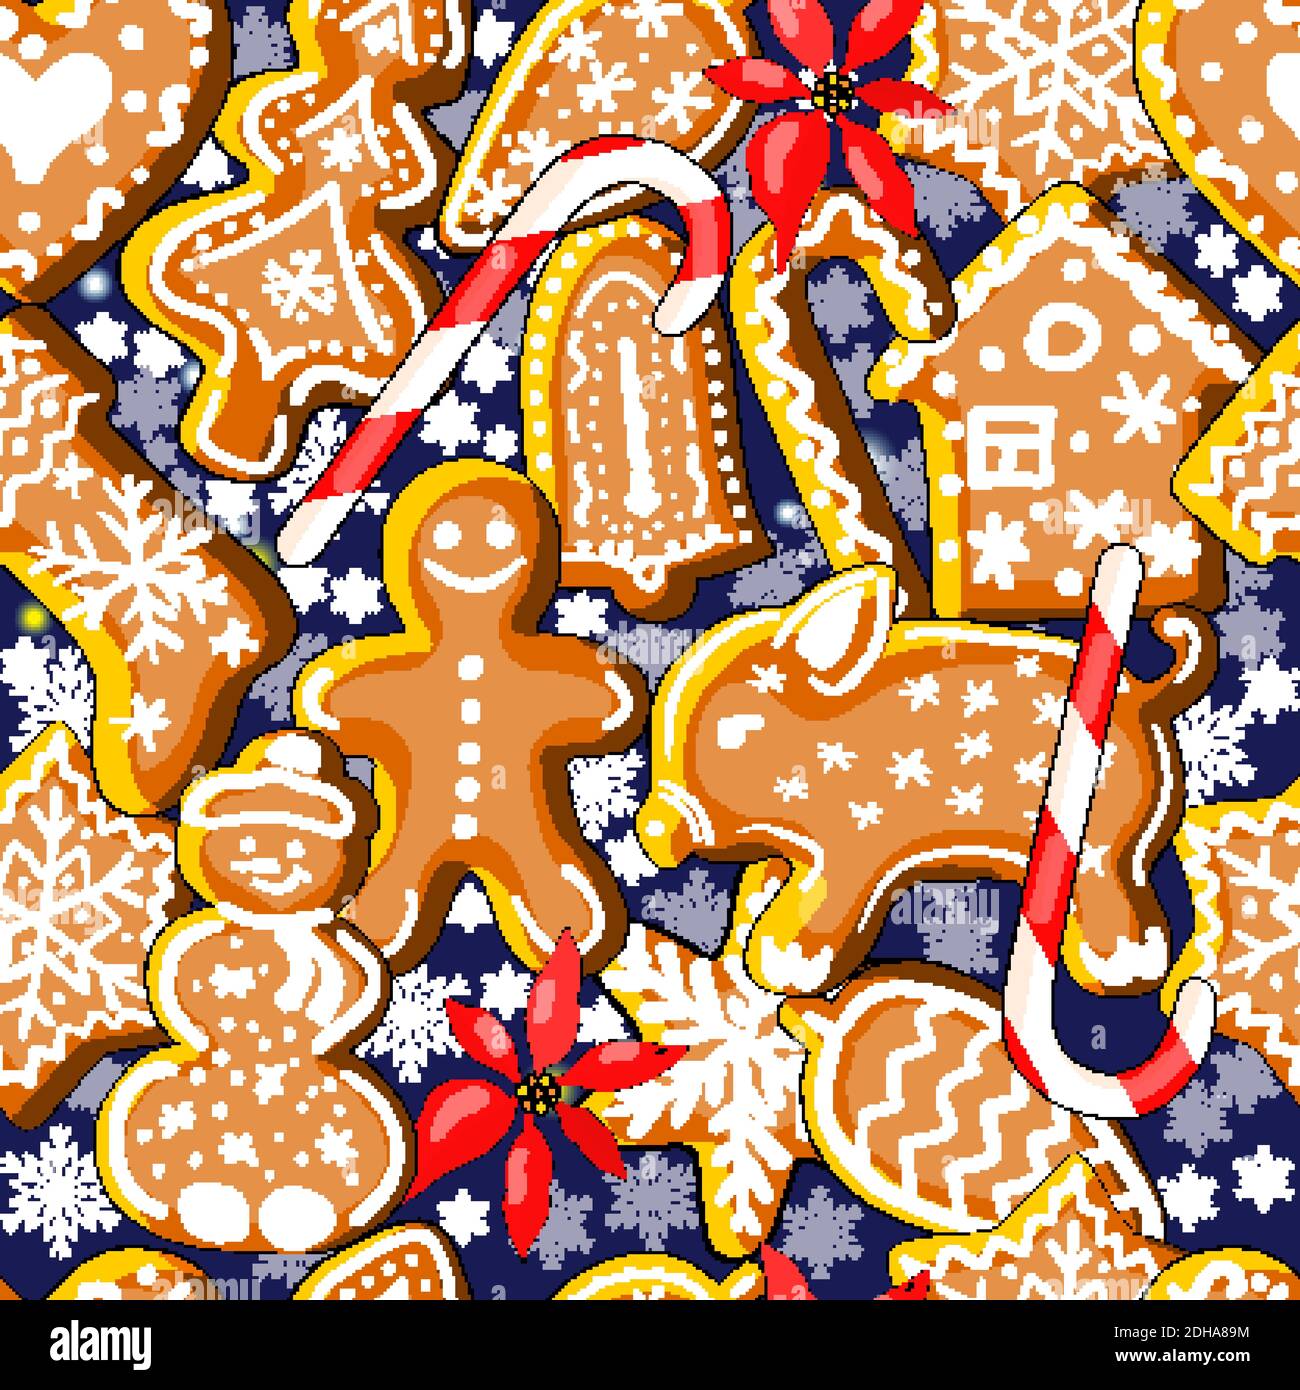 Endless texture with traditional Christmas symbols, snowflake, stars and gingerbreads. Stock Vector